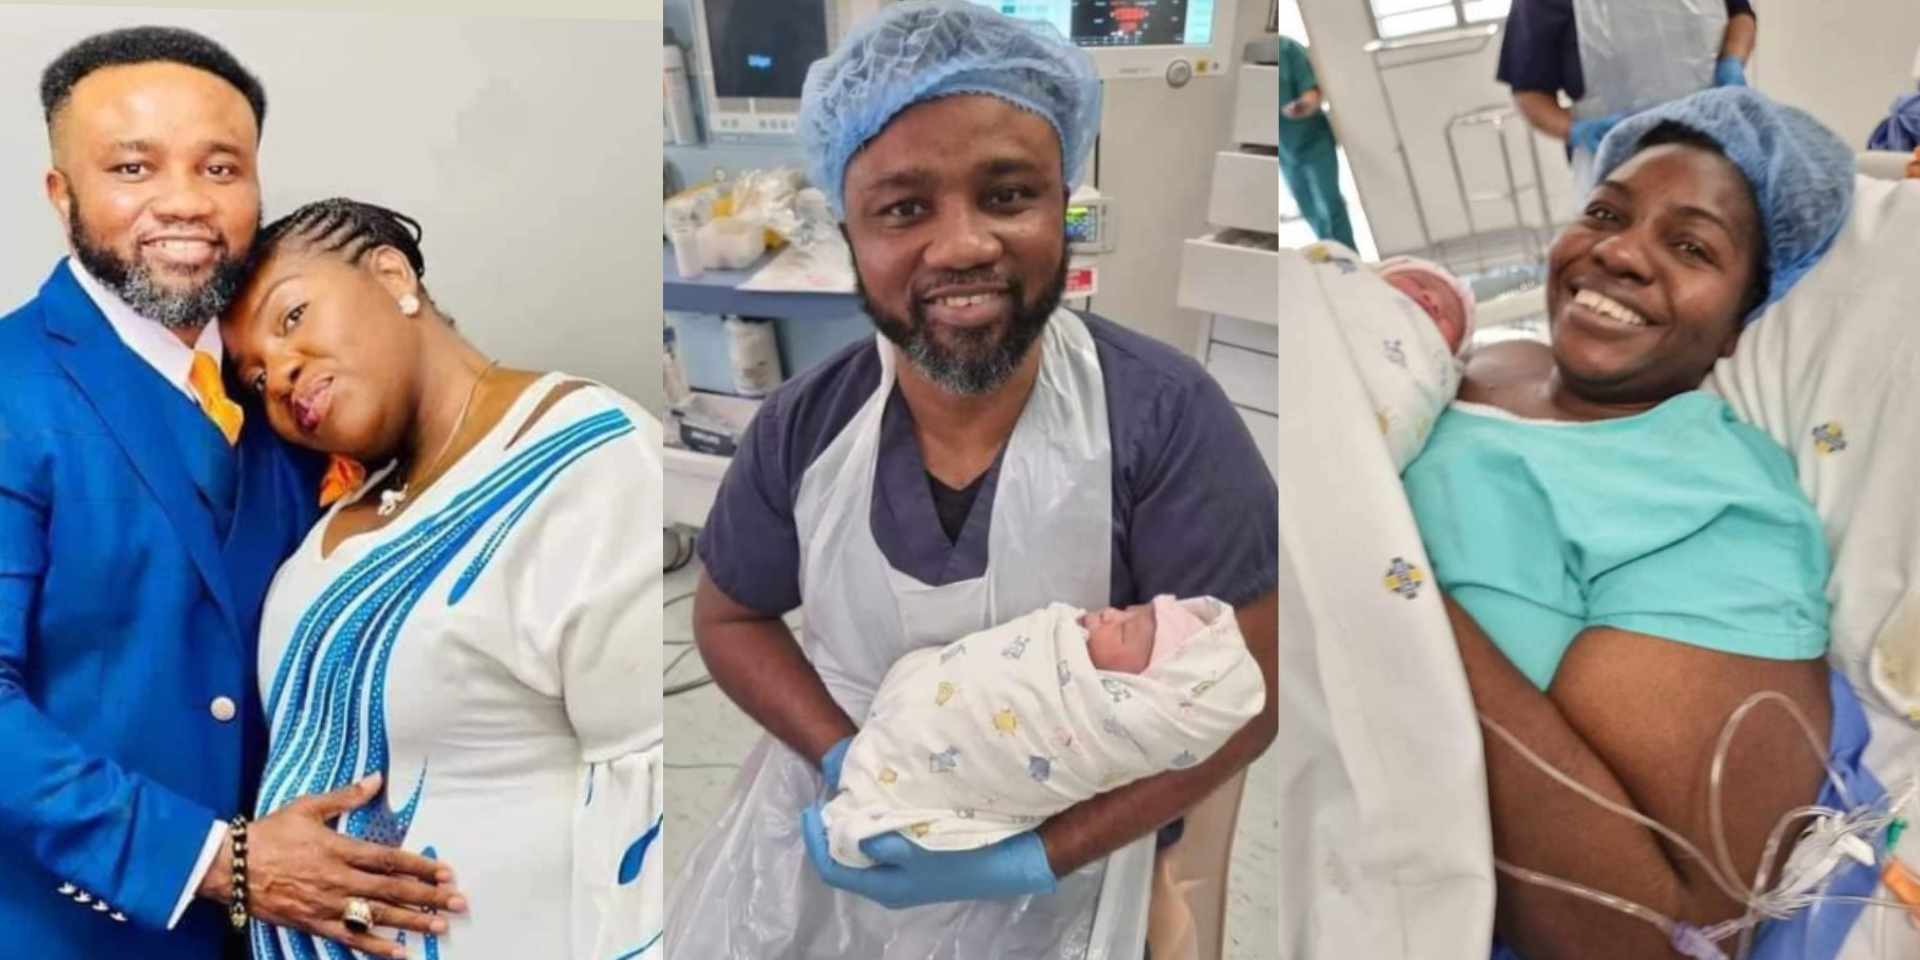 Nigerian pastor and his wife welcome a baby after 13 years of waiting